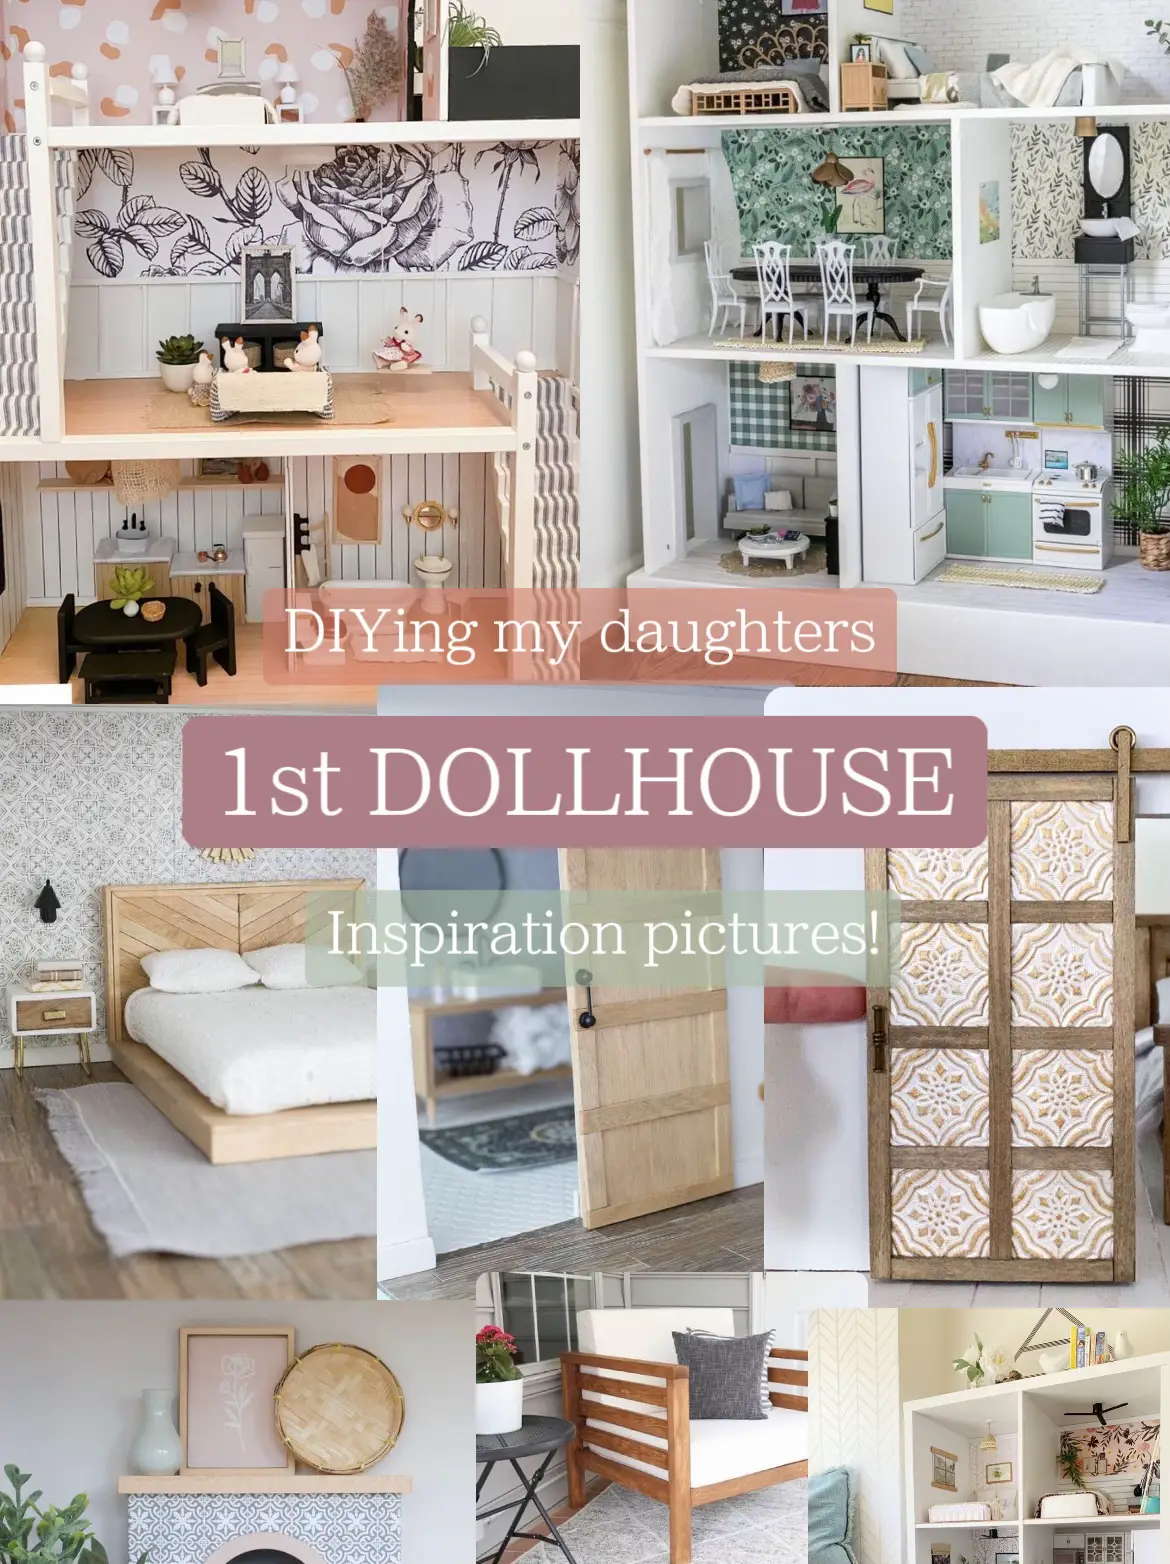 DIY MINIATURE REALISTIC HACKS AND CRAFTS MINI APPLIANCES FOR DOLLHOUSE,  MORE DIY CRAFTS 